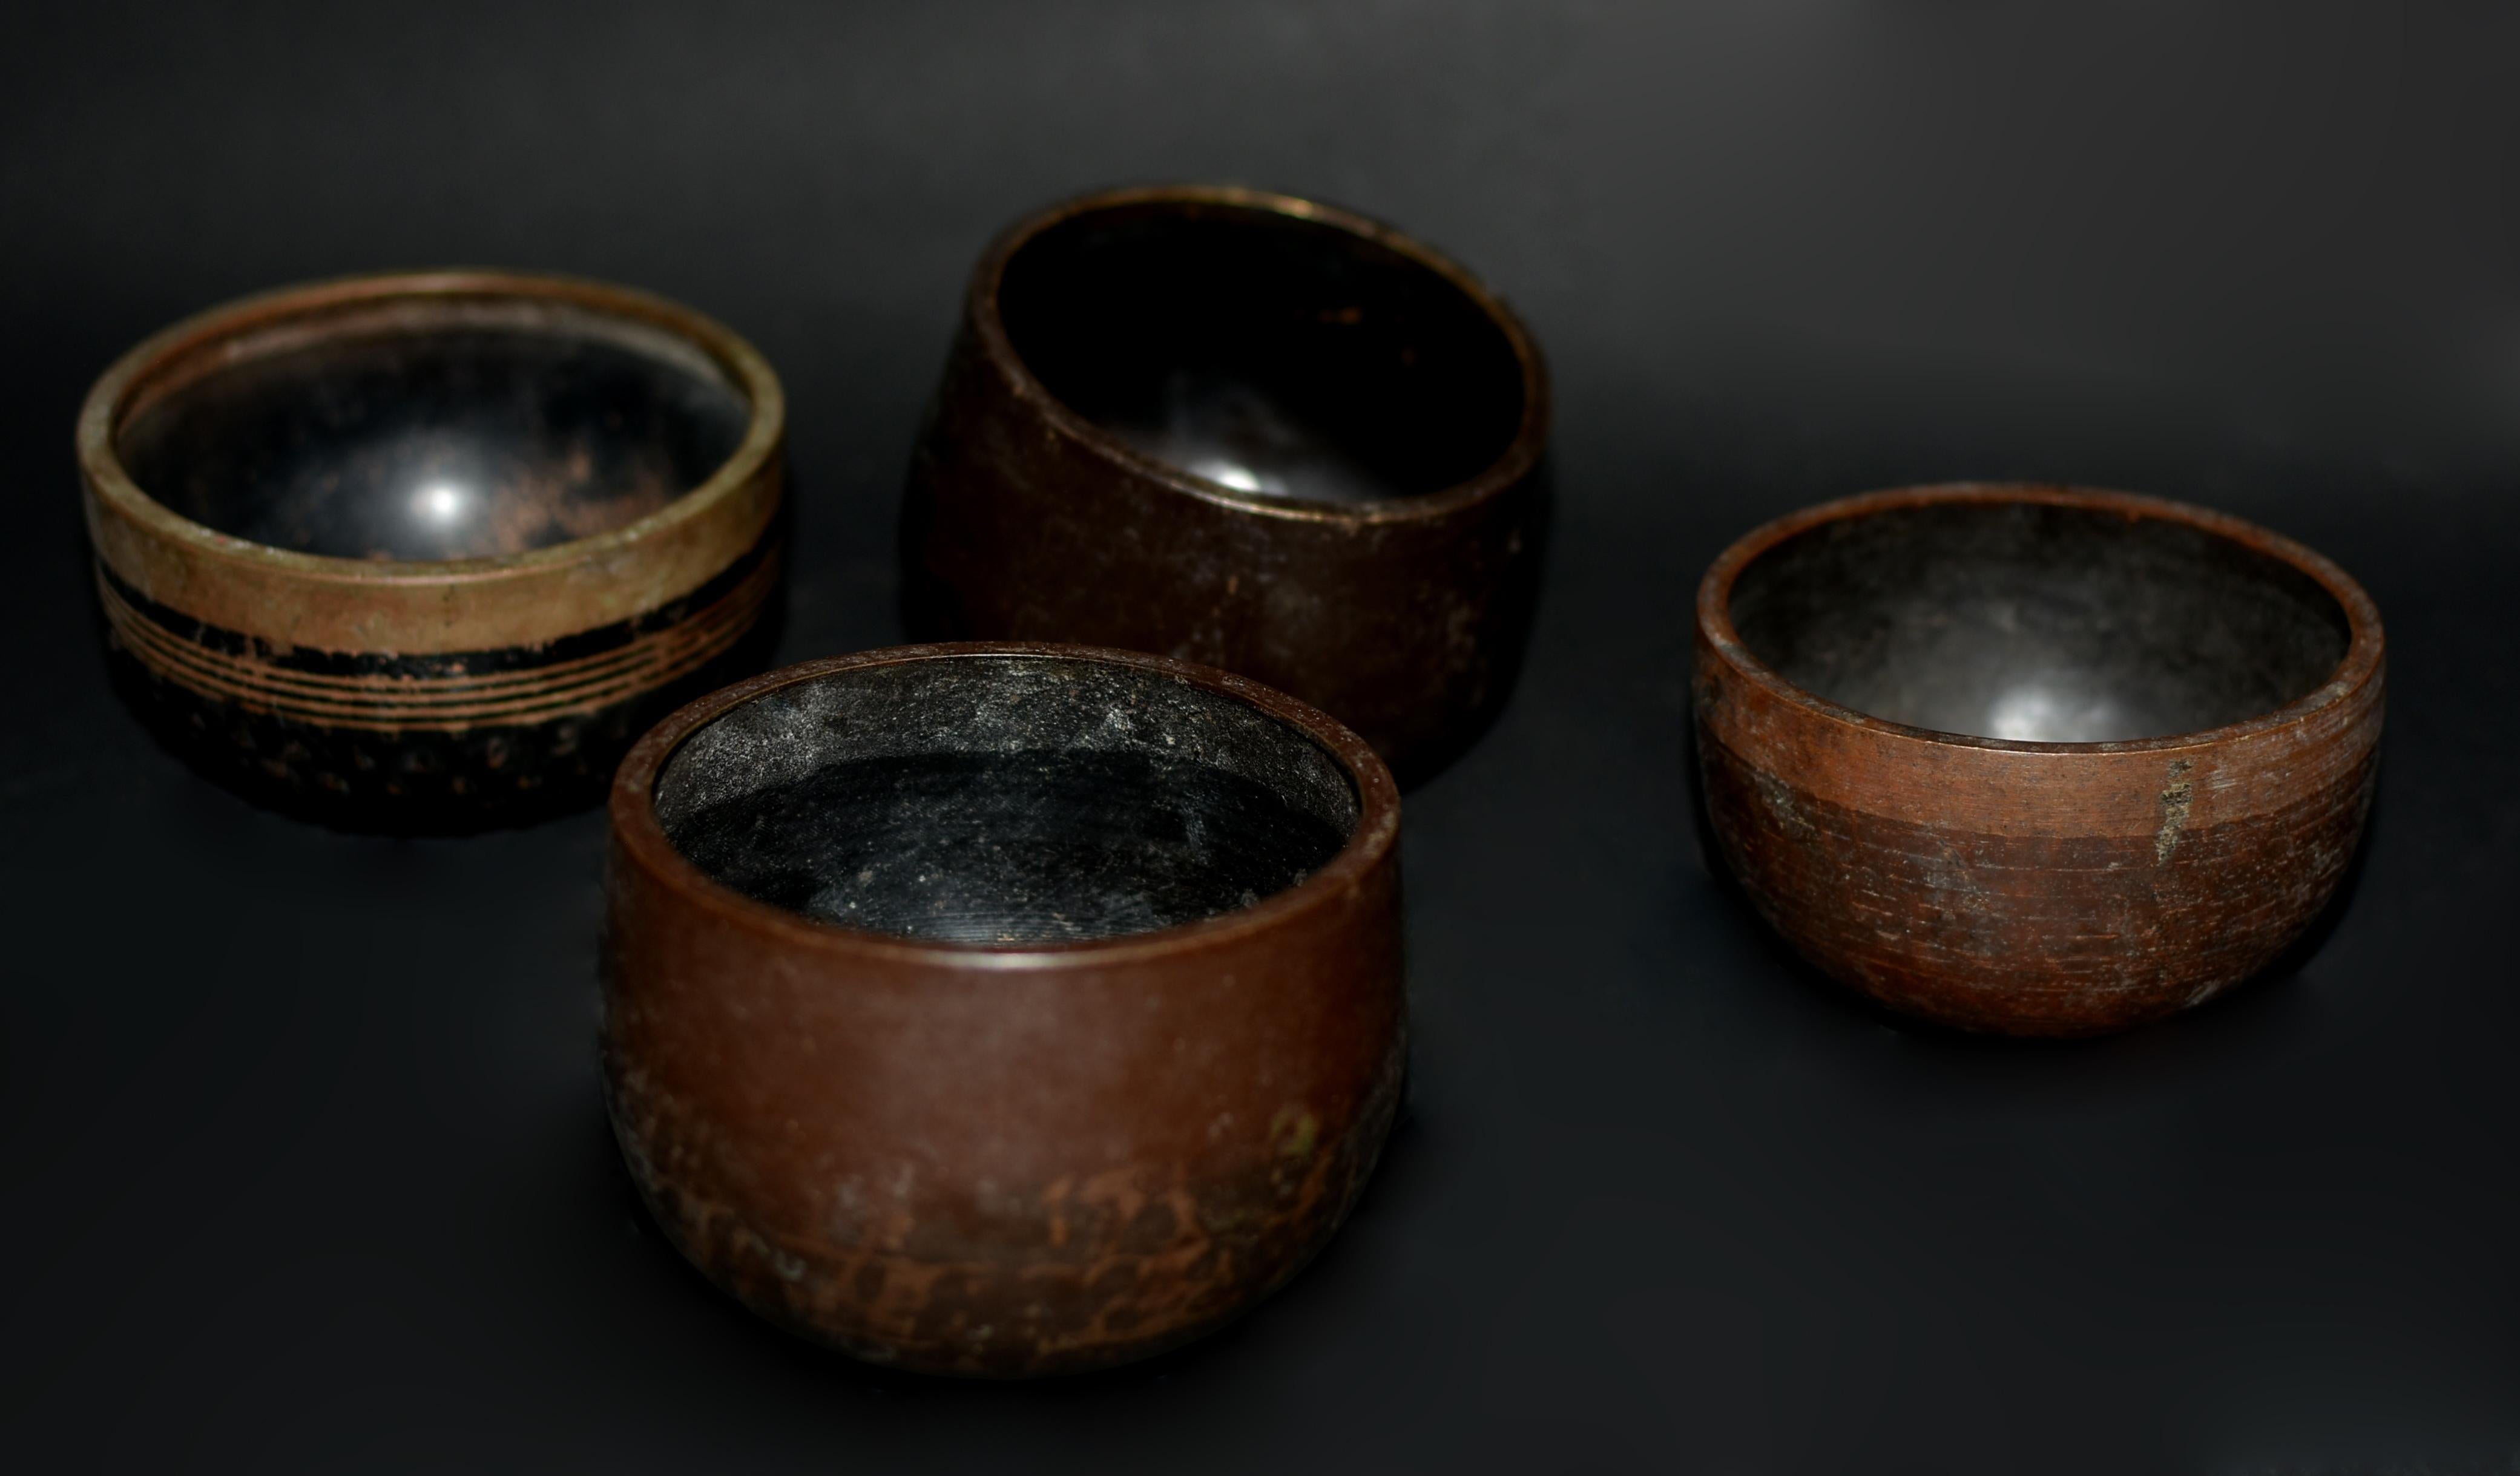 A set of four small 20th century solid bronze Japanese singing bowls. Included are four unique pieces, one a chocolate brown bowl with wide band, one dark espresso bronze piece, a black bronze upright bowl and a black bowl with gold rings and raised